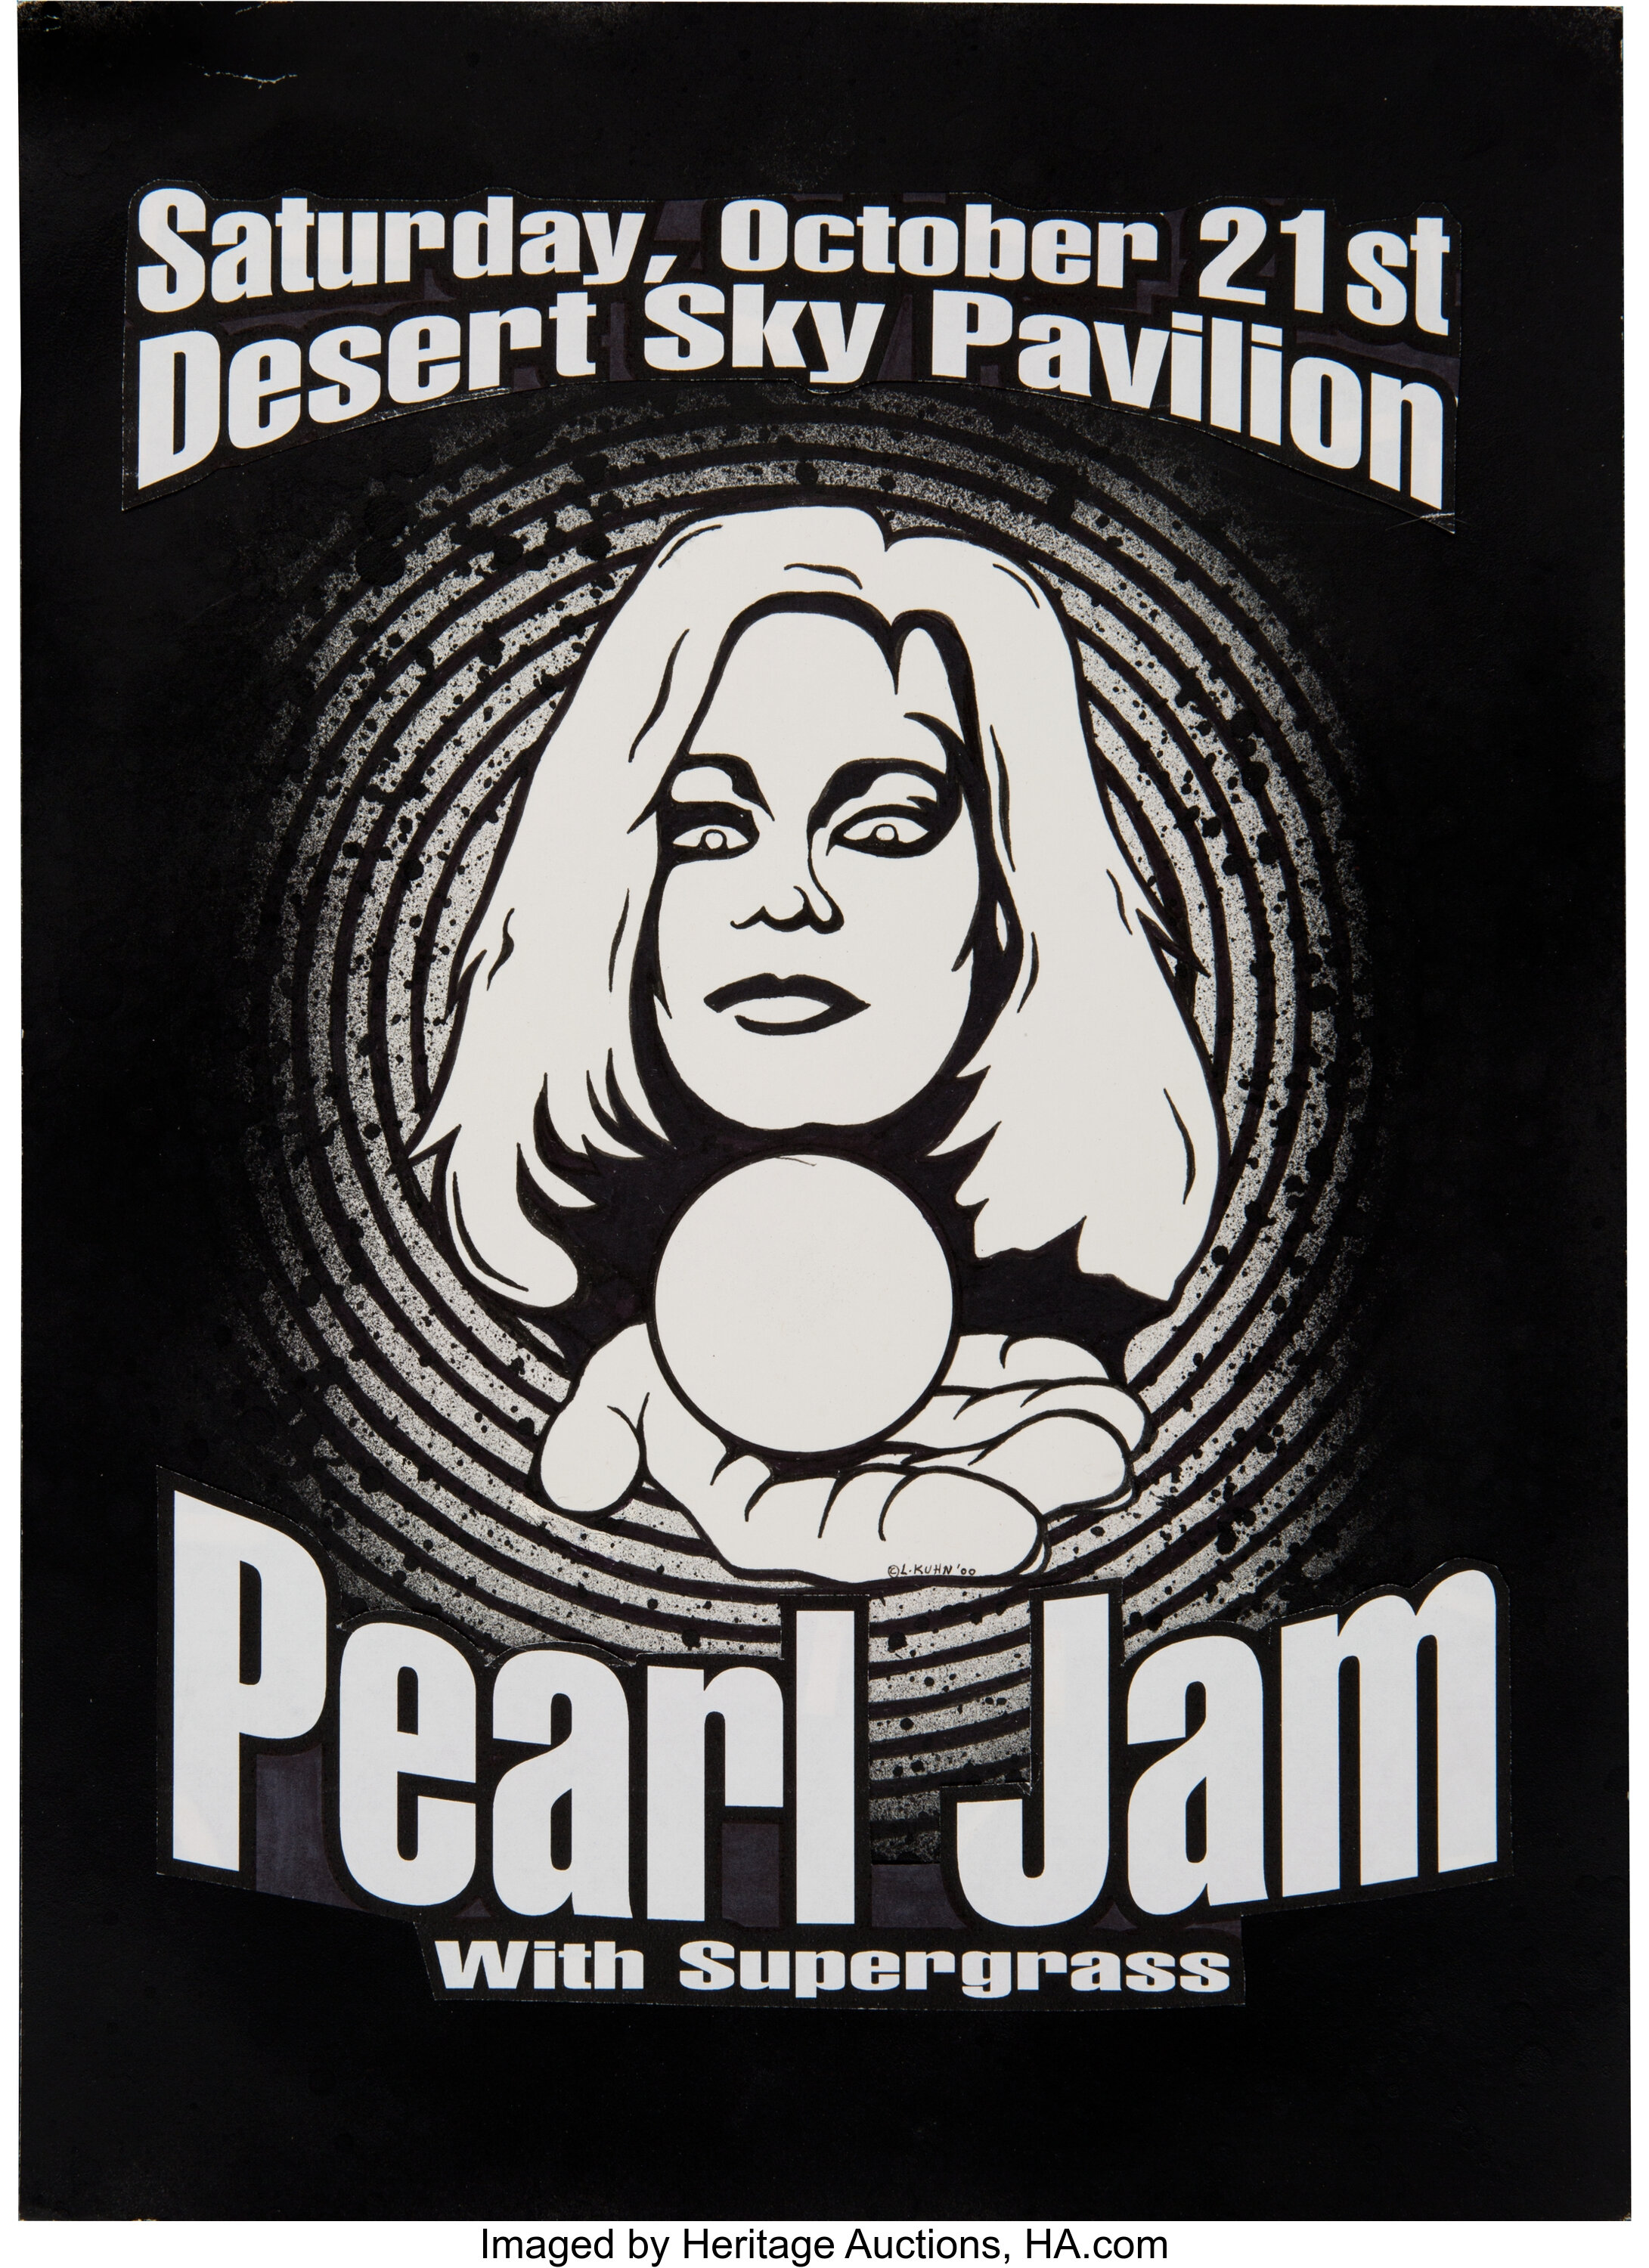 Pearl Jam and Supergrass Original Concert Poster Art by Lindsey  Lot  89603  Heritage Auctions